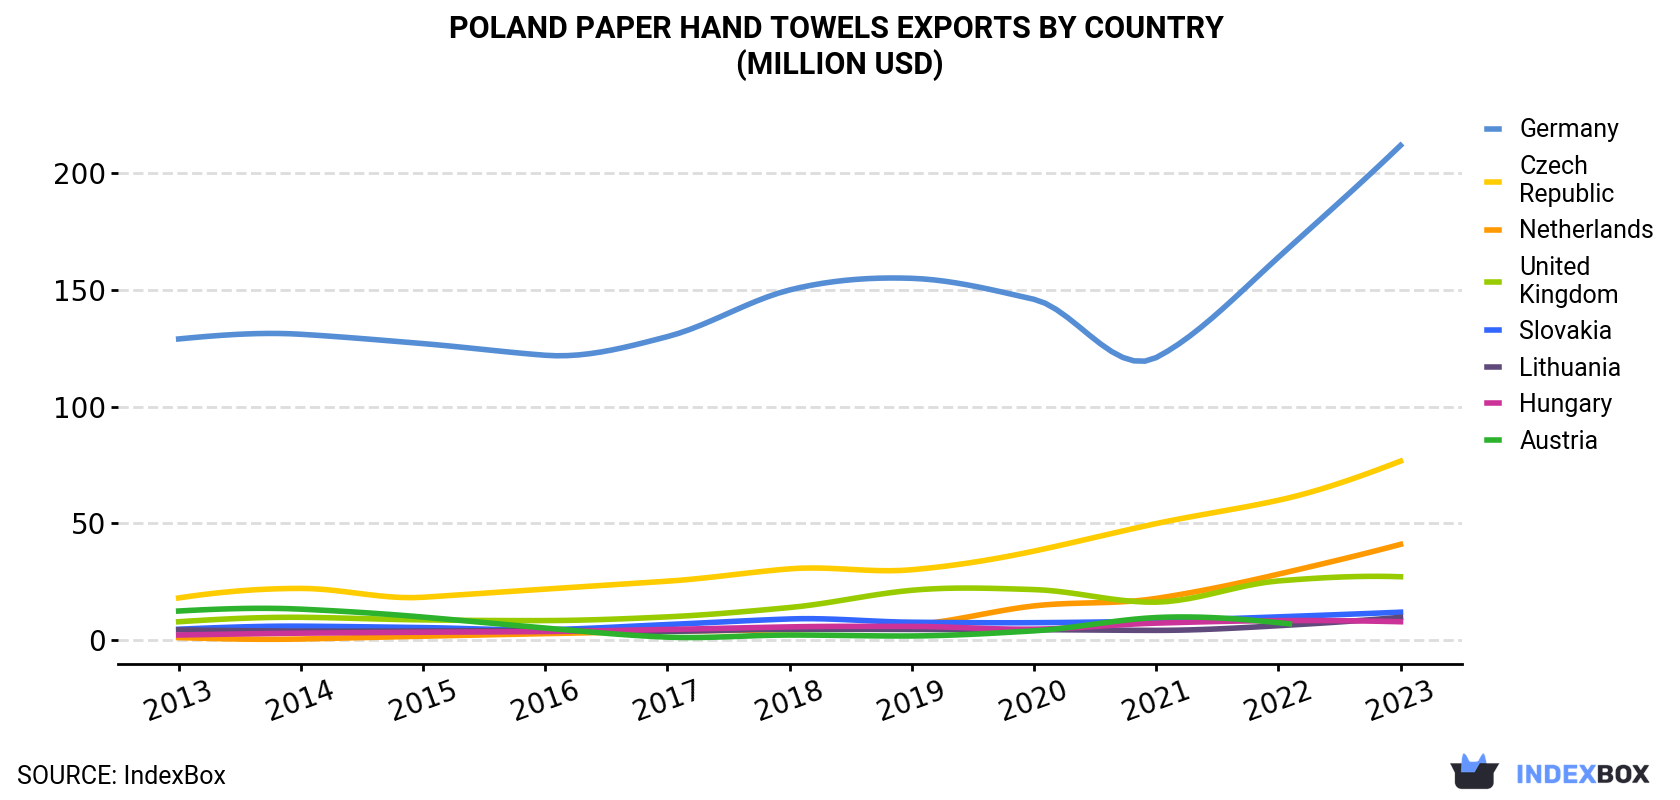 Poland Paper Hand Towels Exports By Country (Million USD)